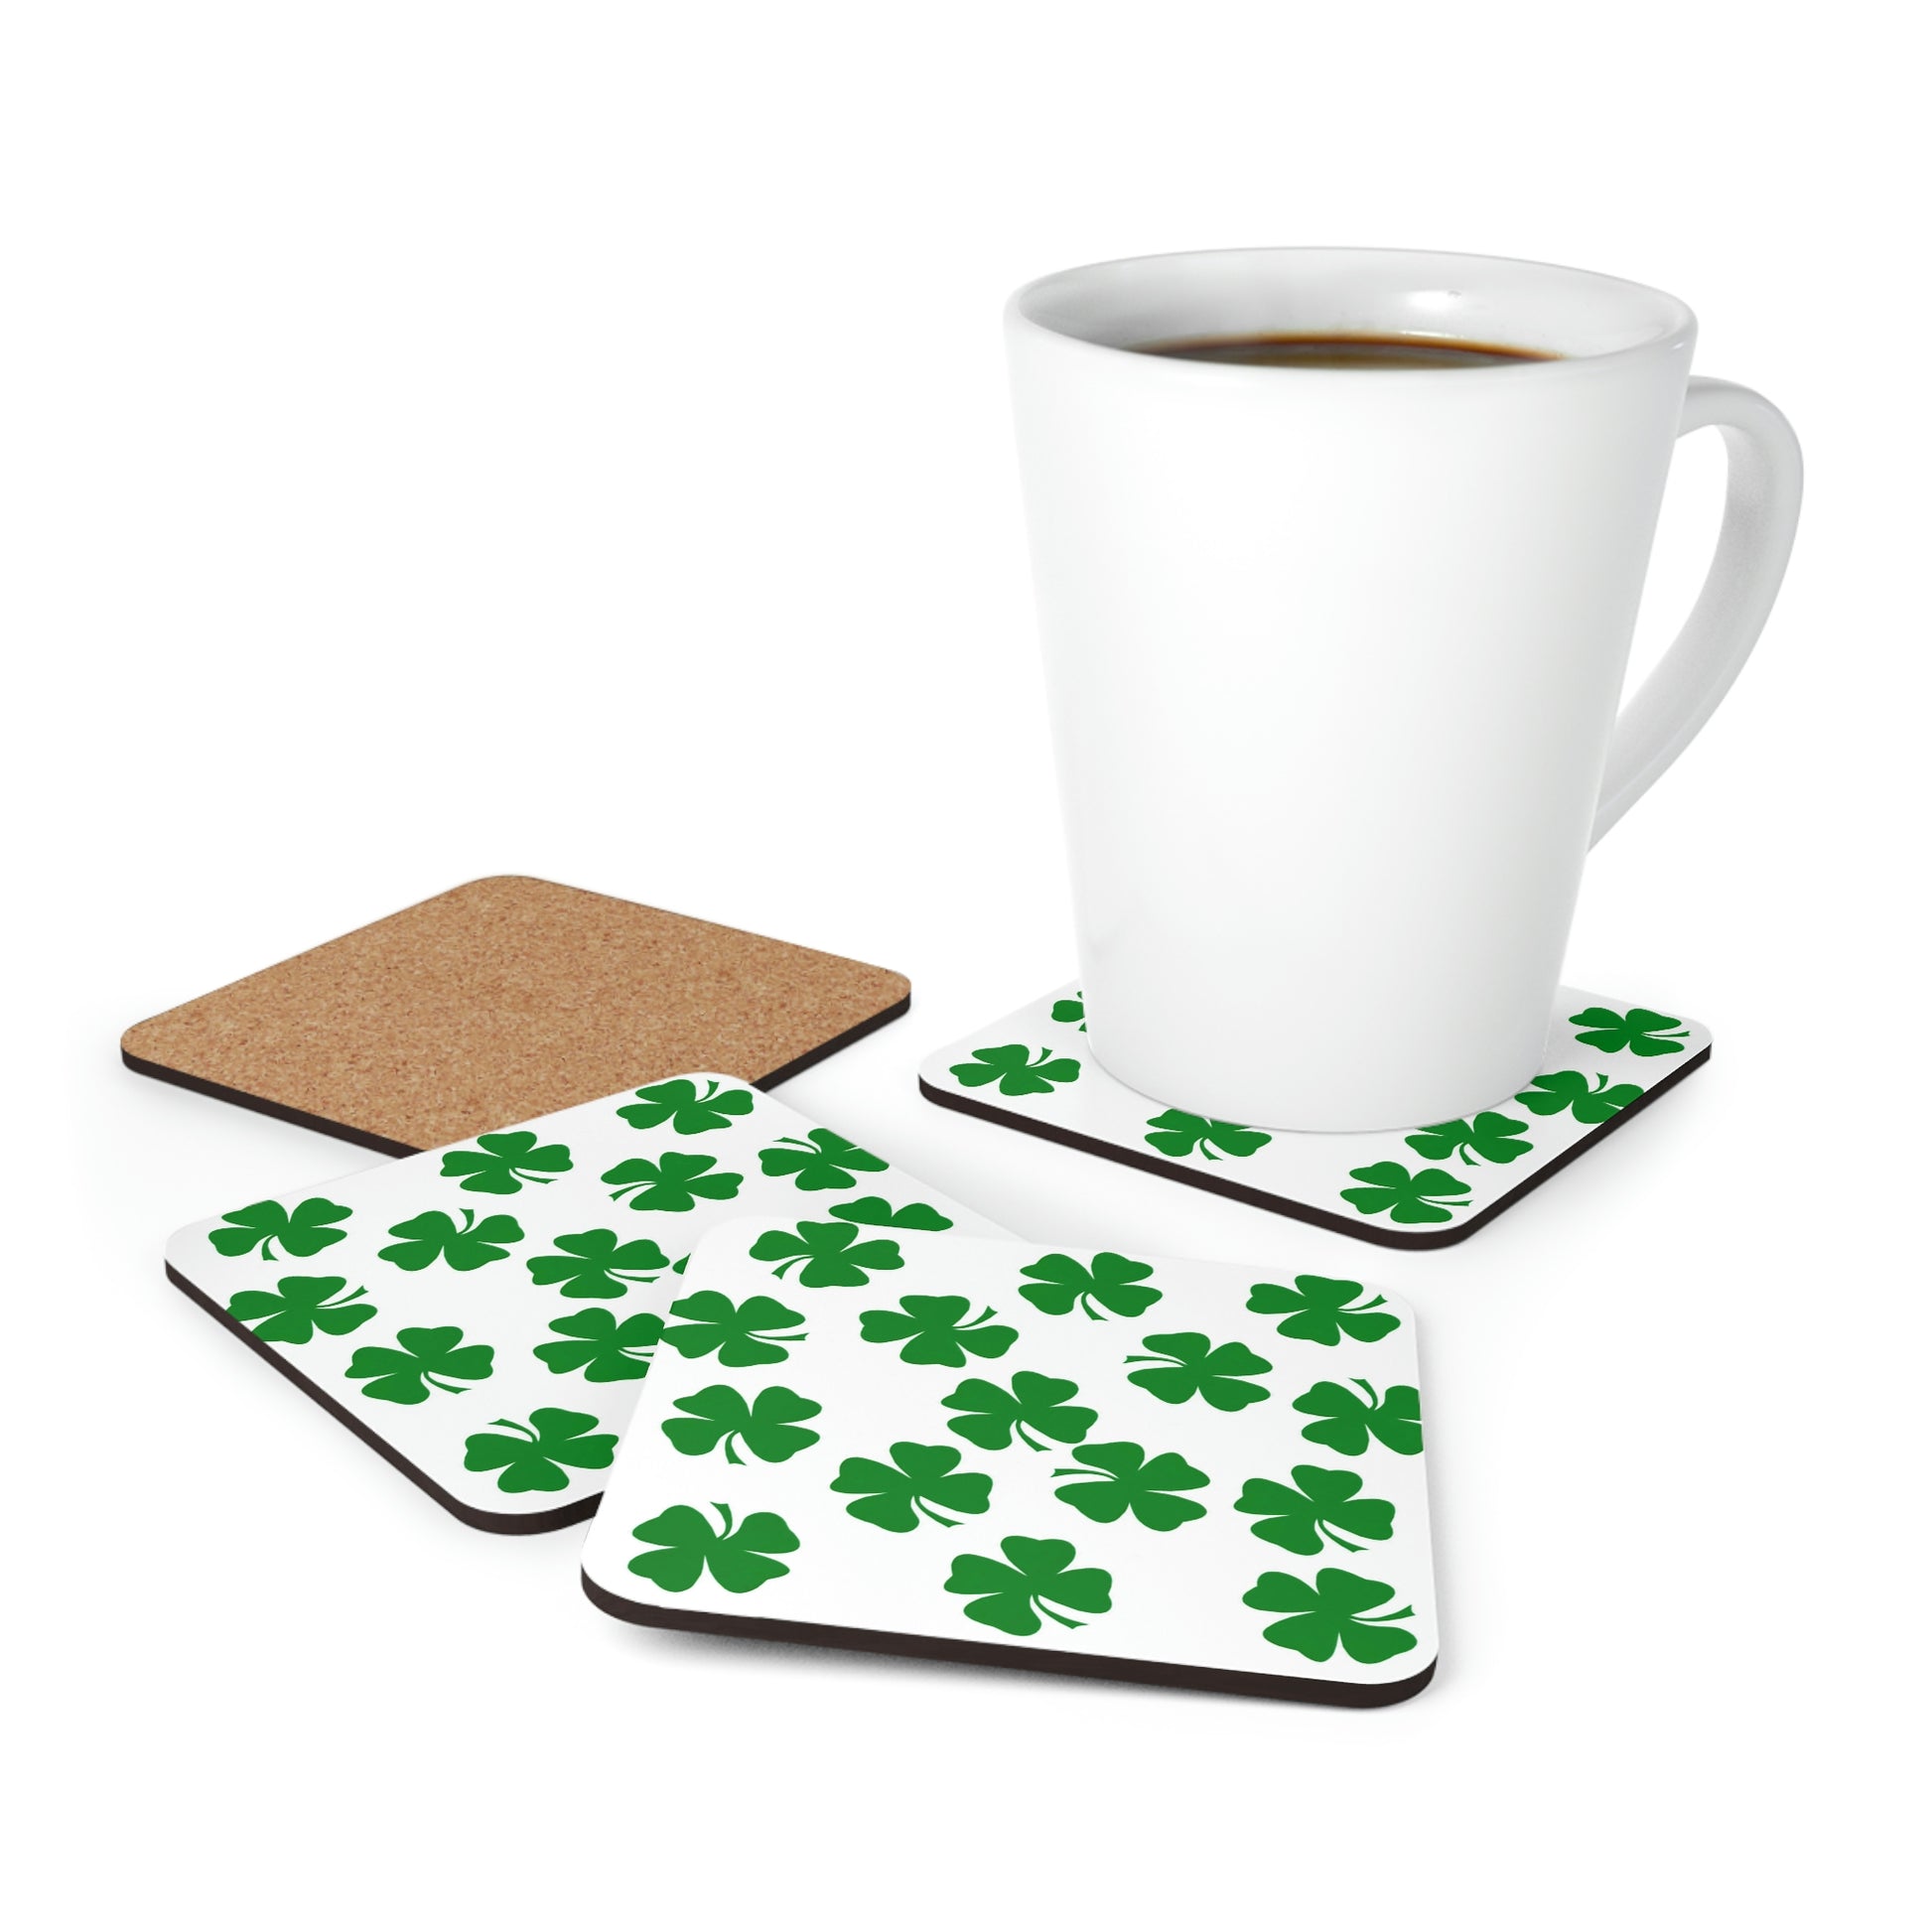 Mock up of a latte mug with the 4 coasters